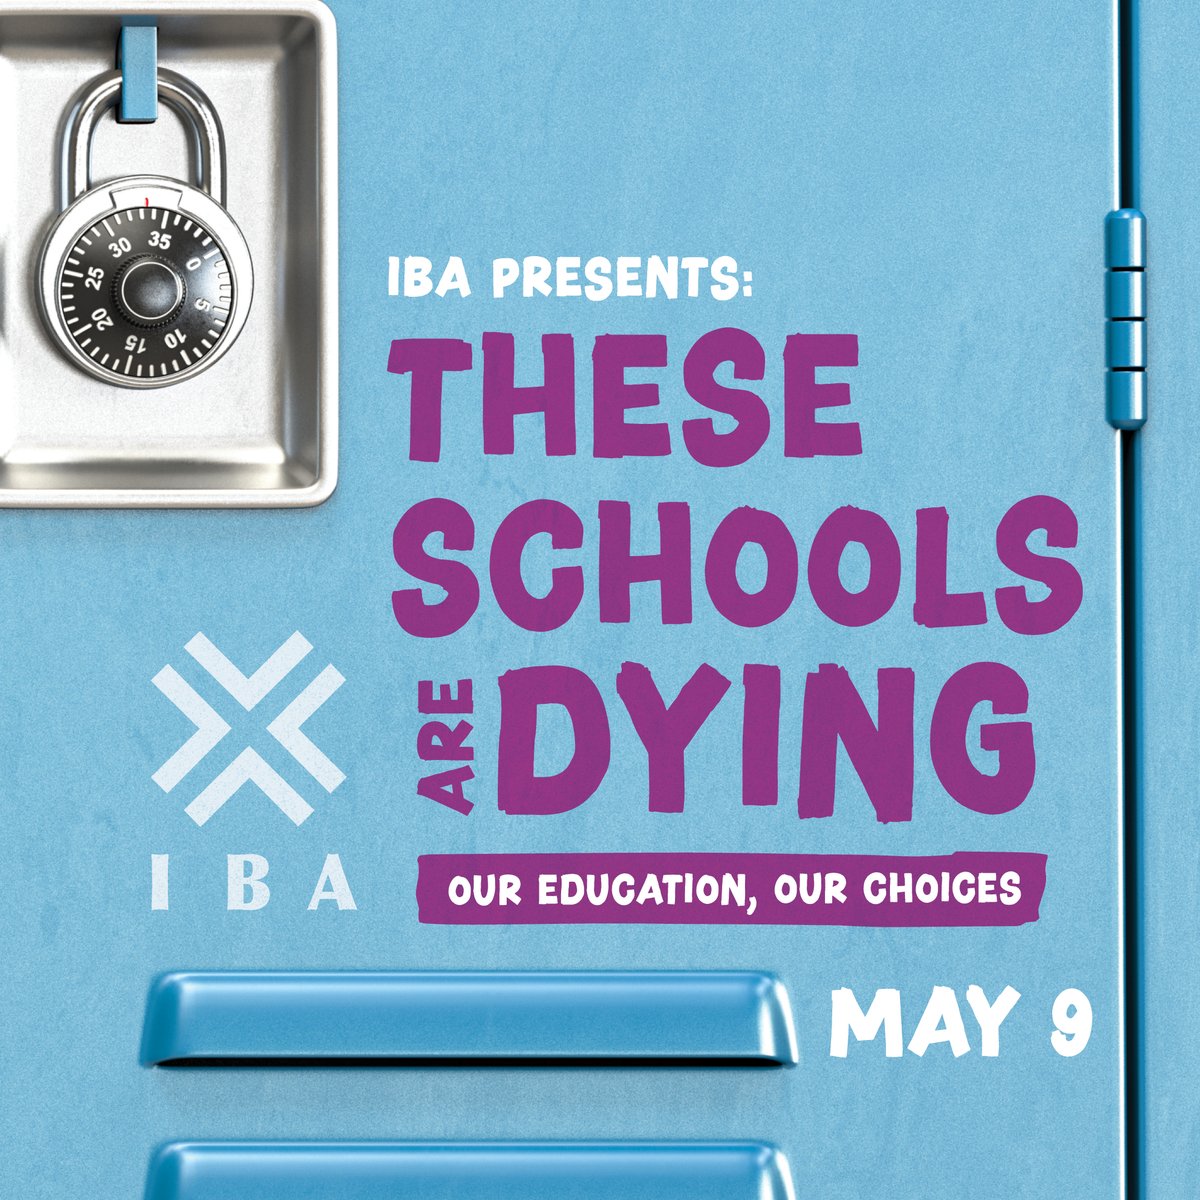 Our Youth Development Program presents, These Schools are Dying: Our Education, Our Choices. Join youth from our community as they perform creative pieces to ignite conversation around challenges to our education system. Free & open to all May 9 at 5PM bit.ly/3UxbzBg